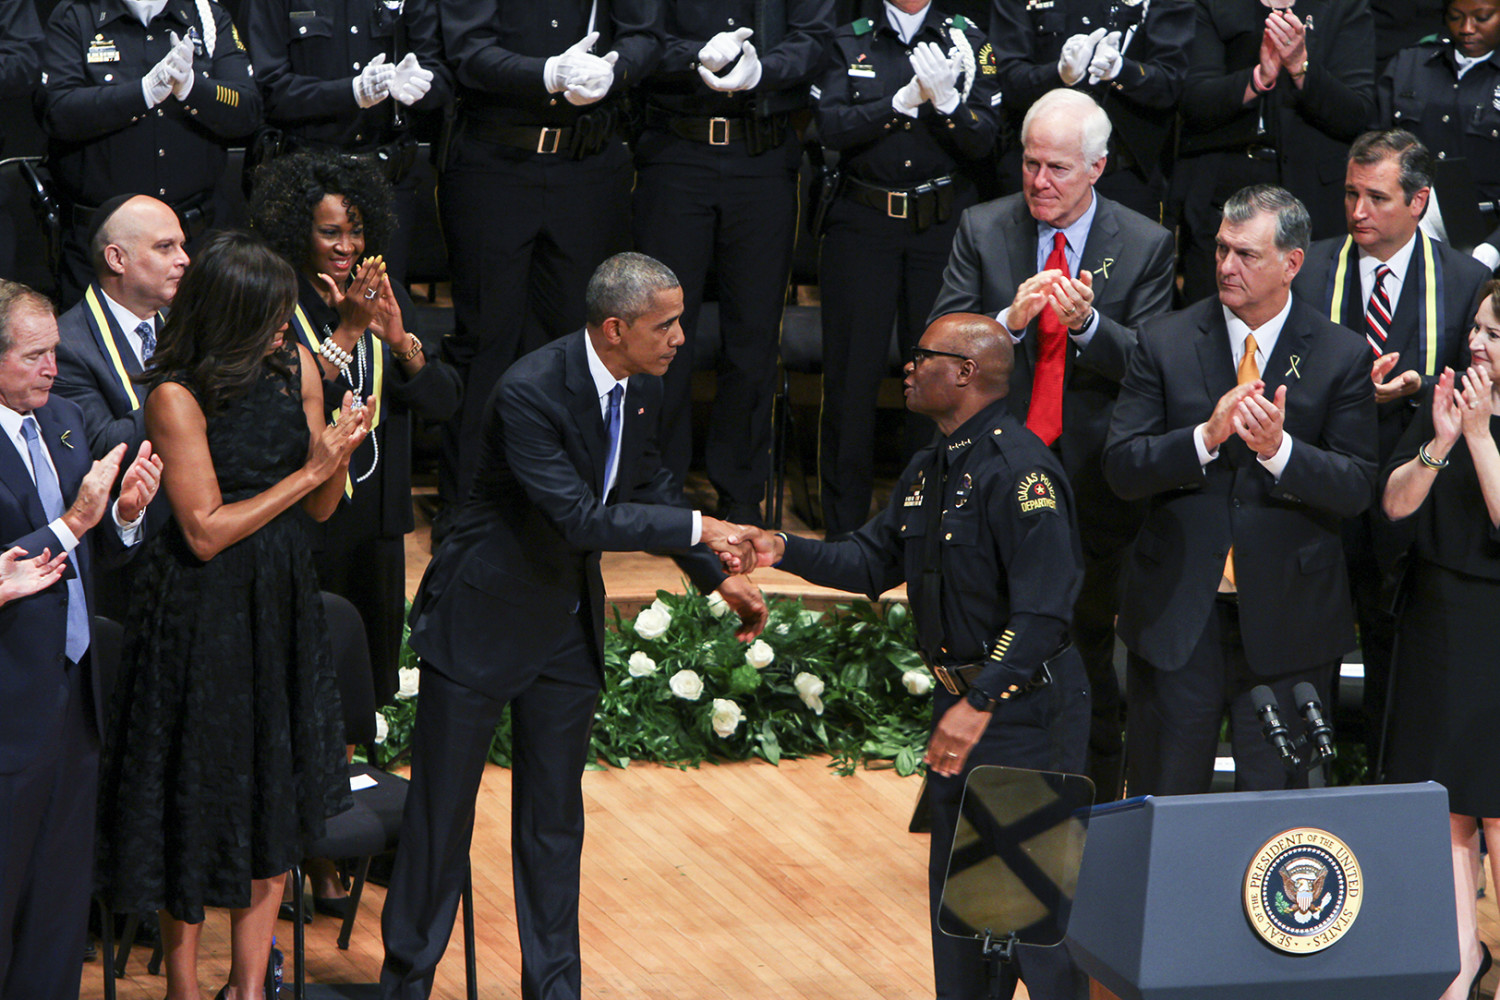 President Barack Obama shook the hand of Dallas Police Chief David Brown to thank him for his leadership in the face of tragedy when Obama visited the Morton H. Meyerson Symphony Center on July 12. (Andrew Gallegos | Photo Editor)